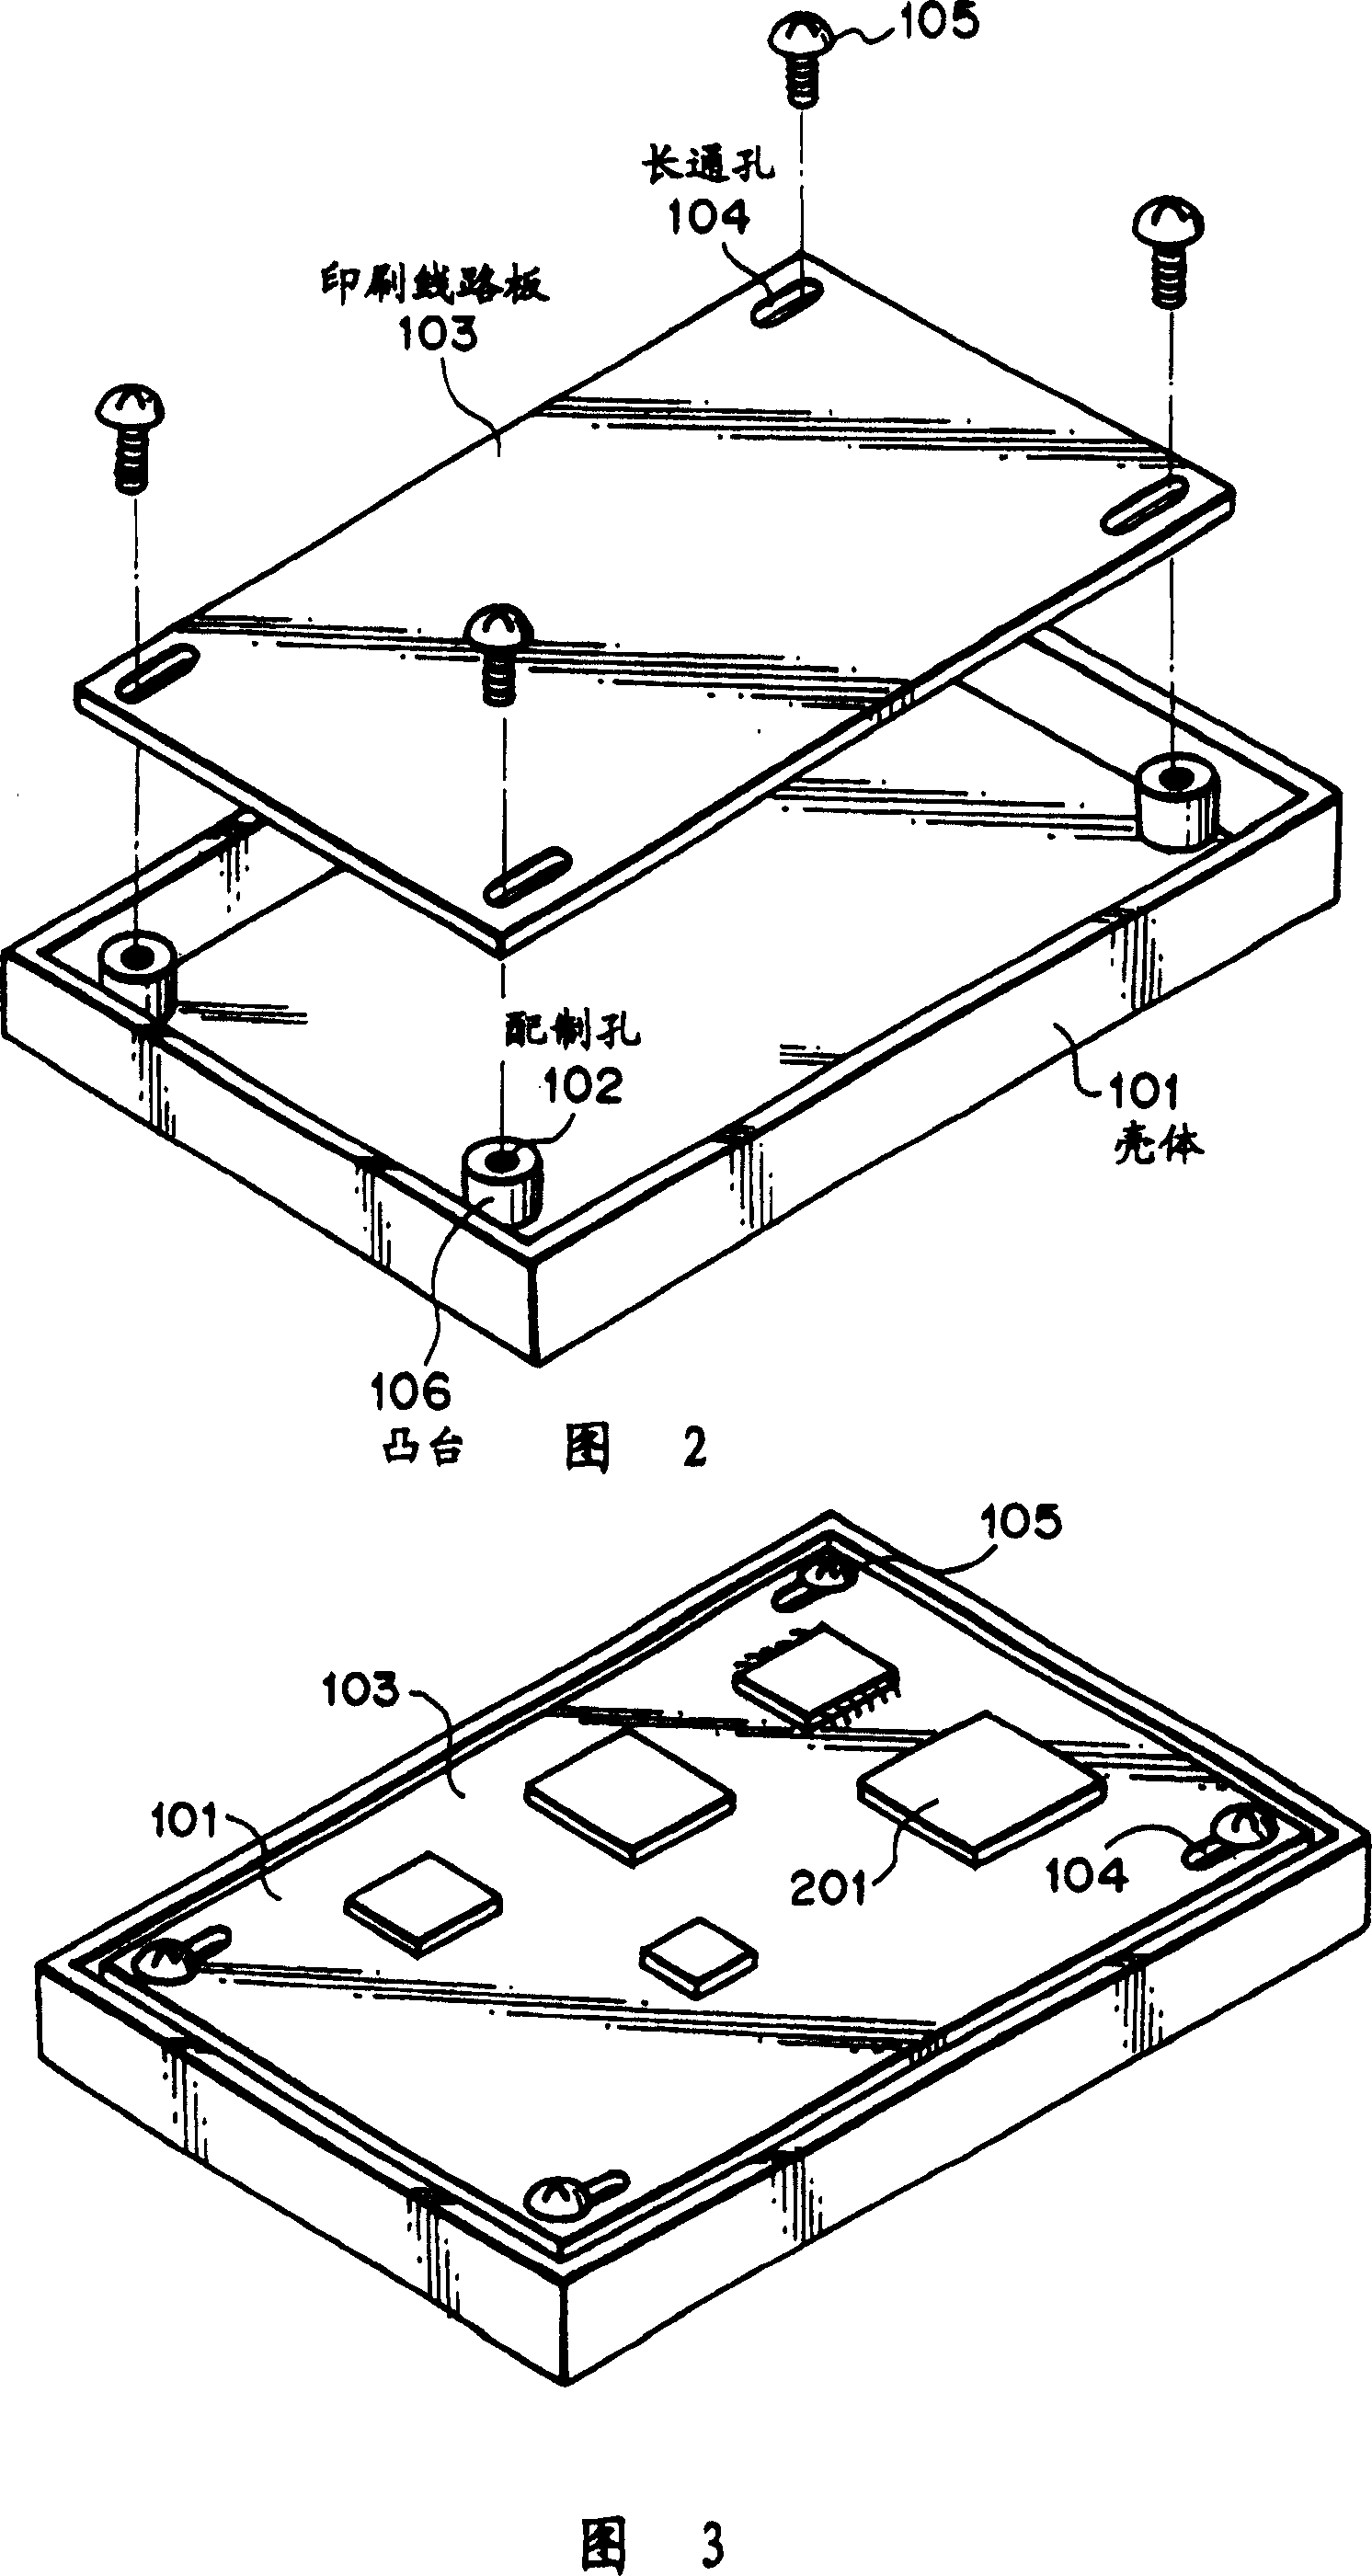 Deformation-resistant mounting for a circuit board in a portable device